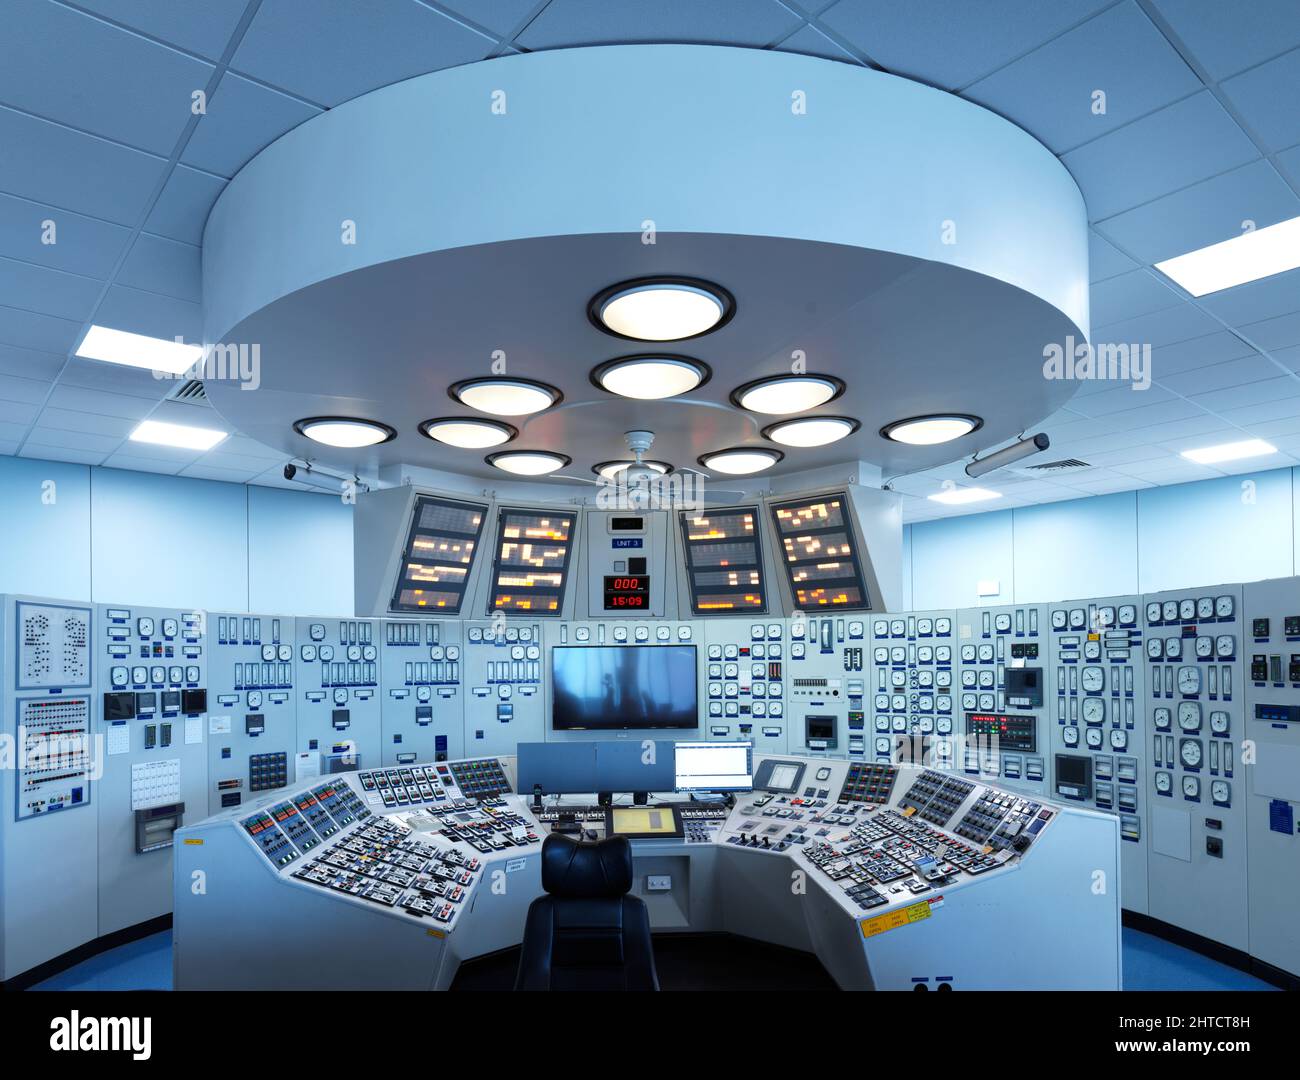 Cottam Power Station, Outgang Lane, Cottam, Treswell, Bassetlaw, Nottinghamshire, 2018. Interior view of a control room in the power station, showing the unit control desk with lighting above. Stock Photo